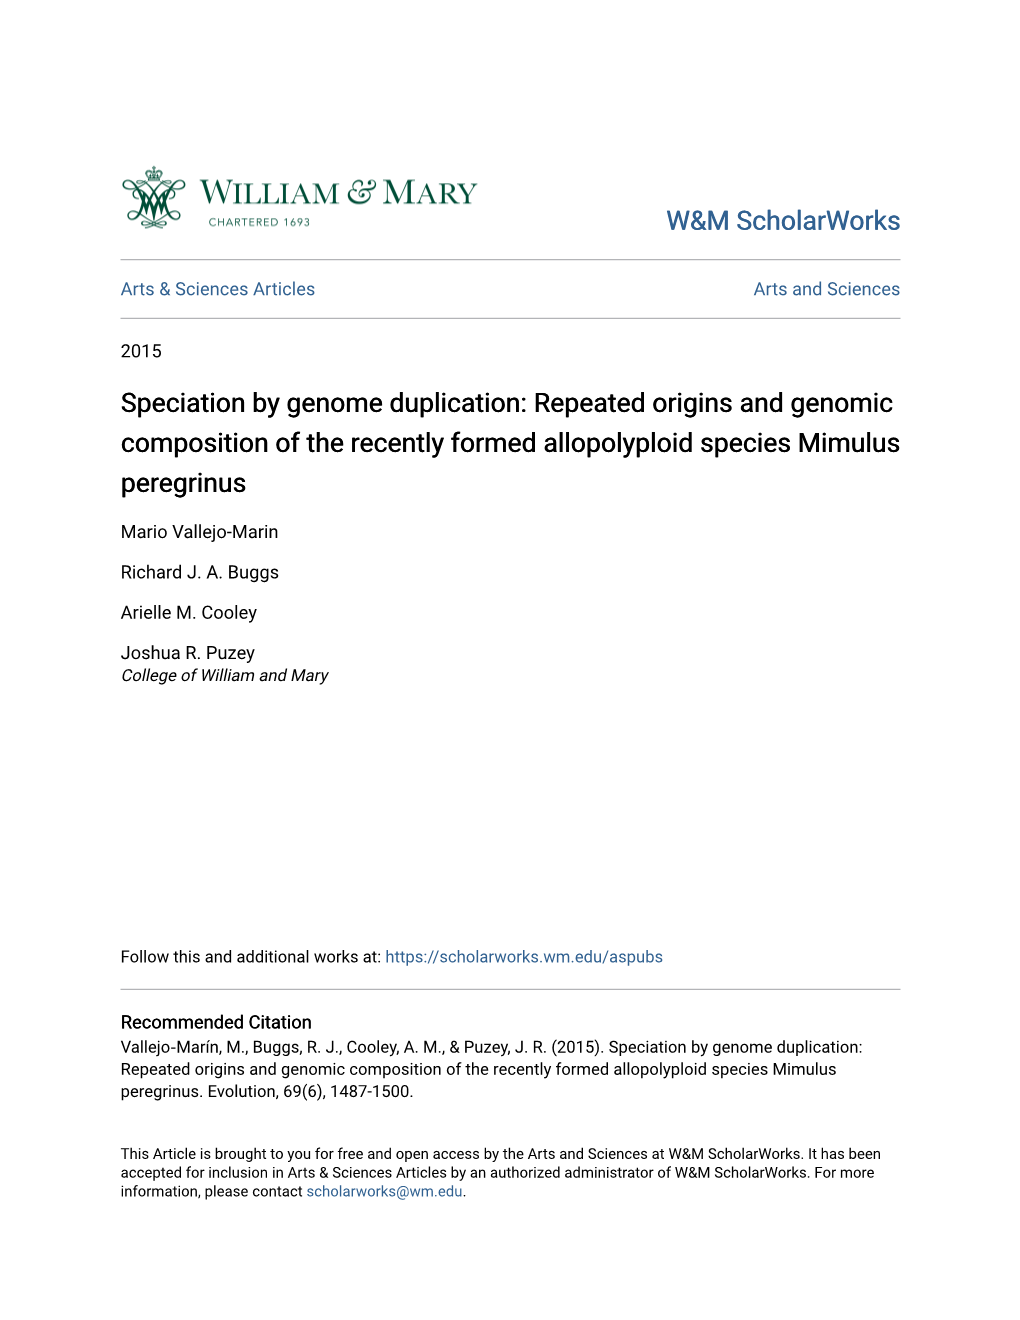 Speciation by Genome Duplication: Repeated Origins and Genomic Composition of the Recently Formed Allopolyploid Species Mimulus Peregrinus